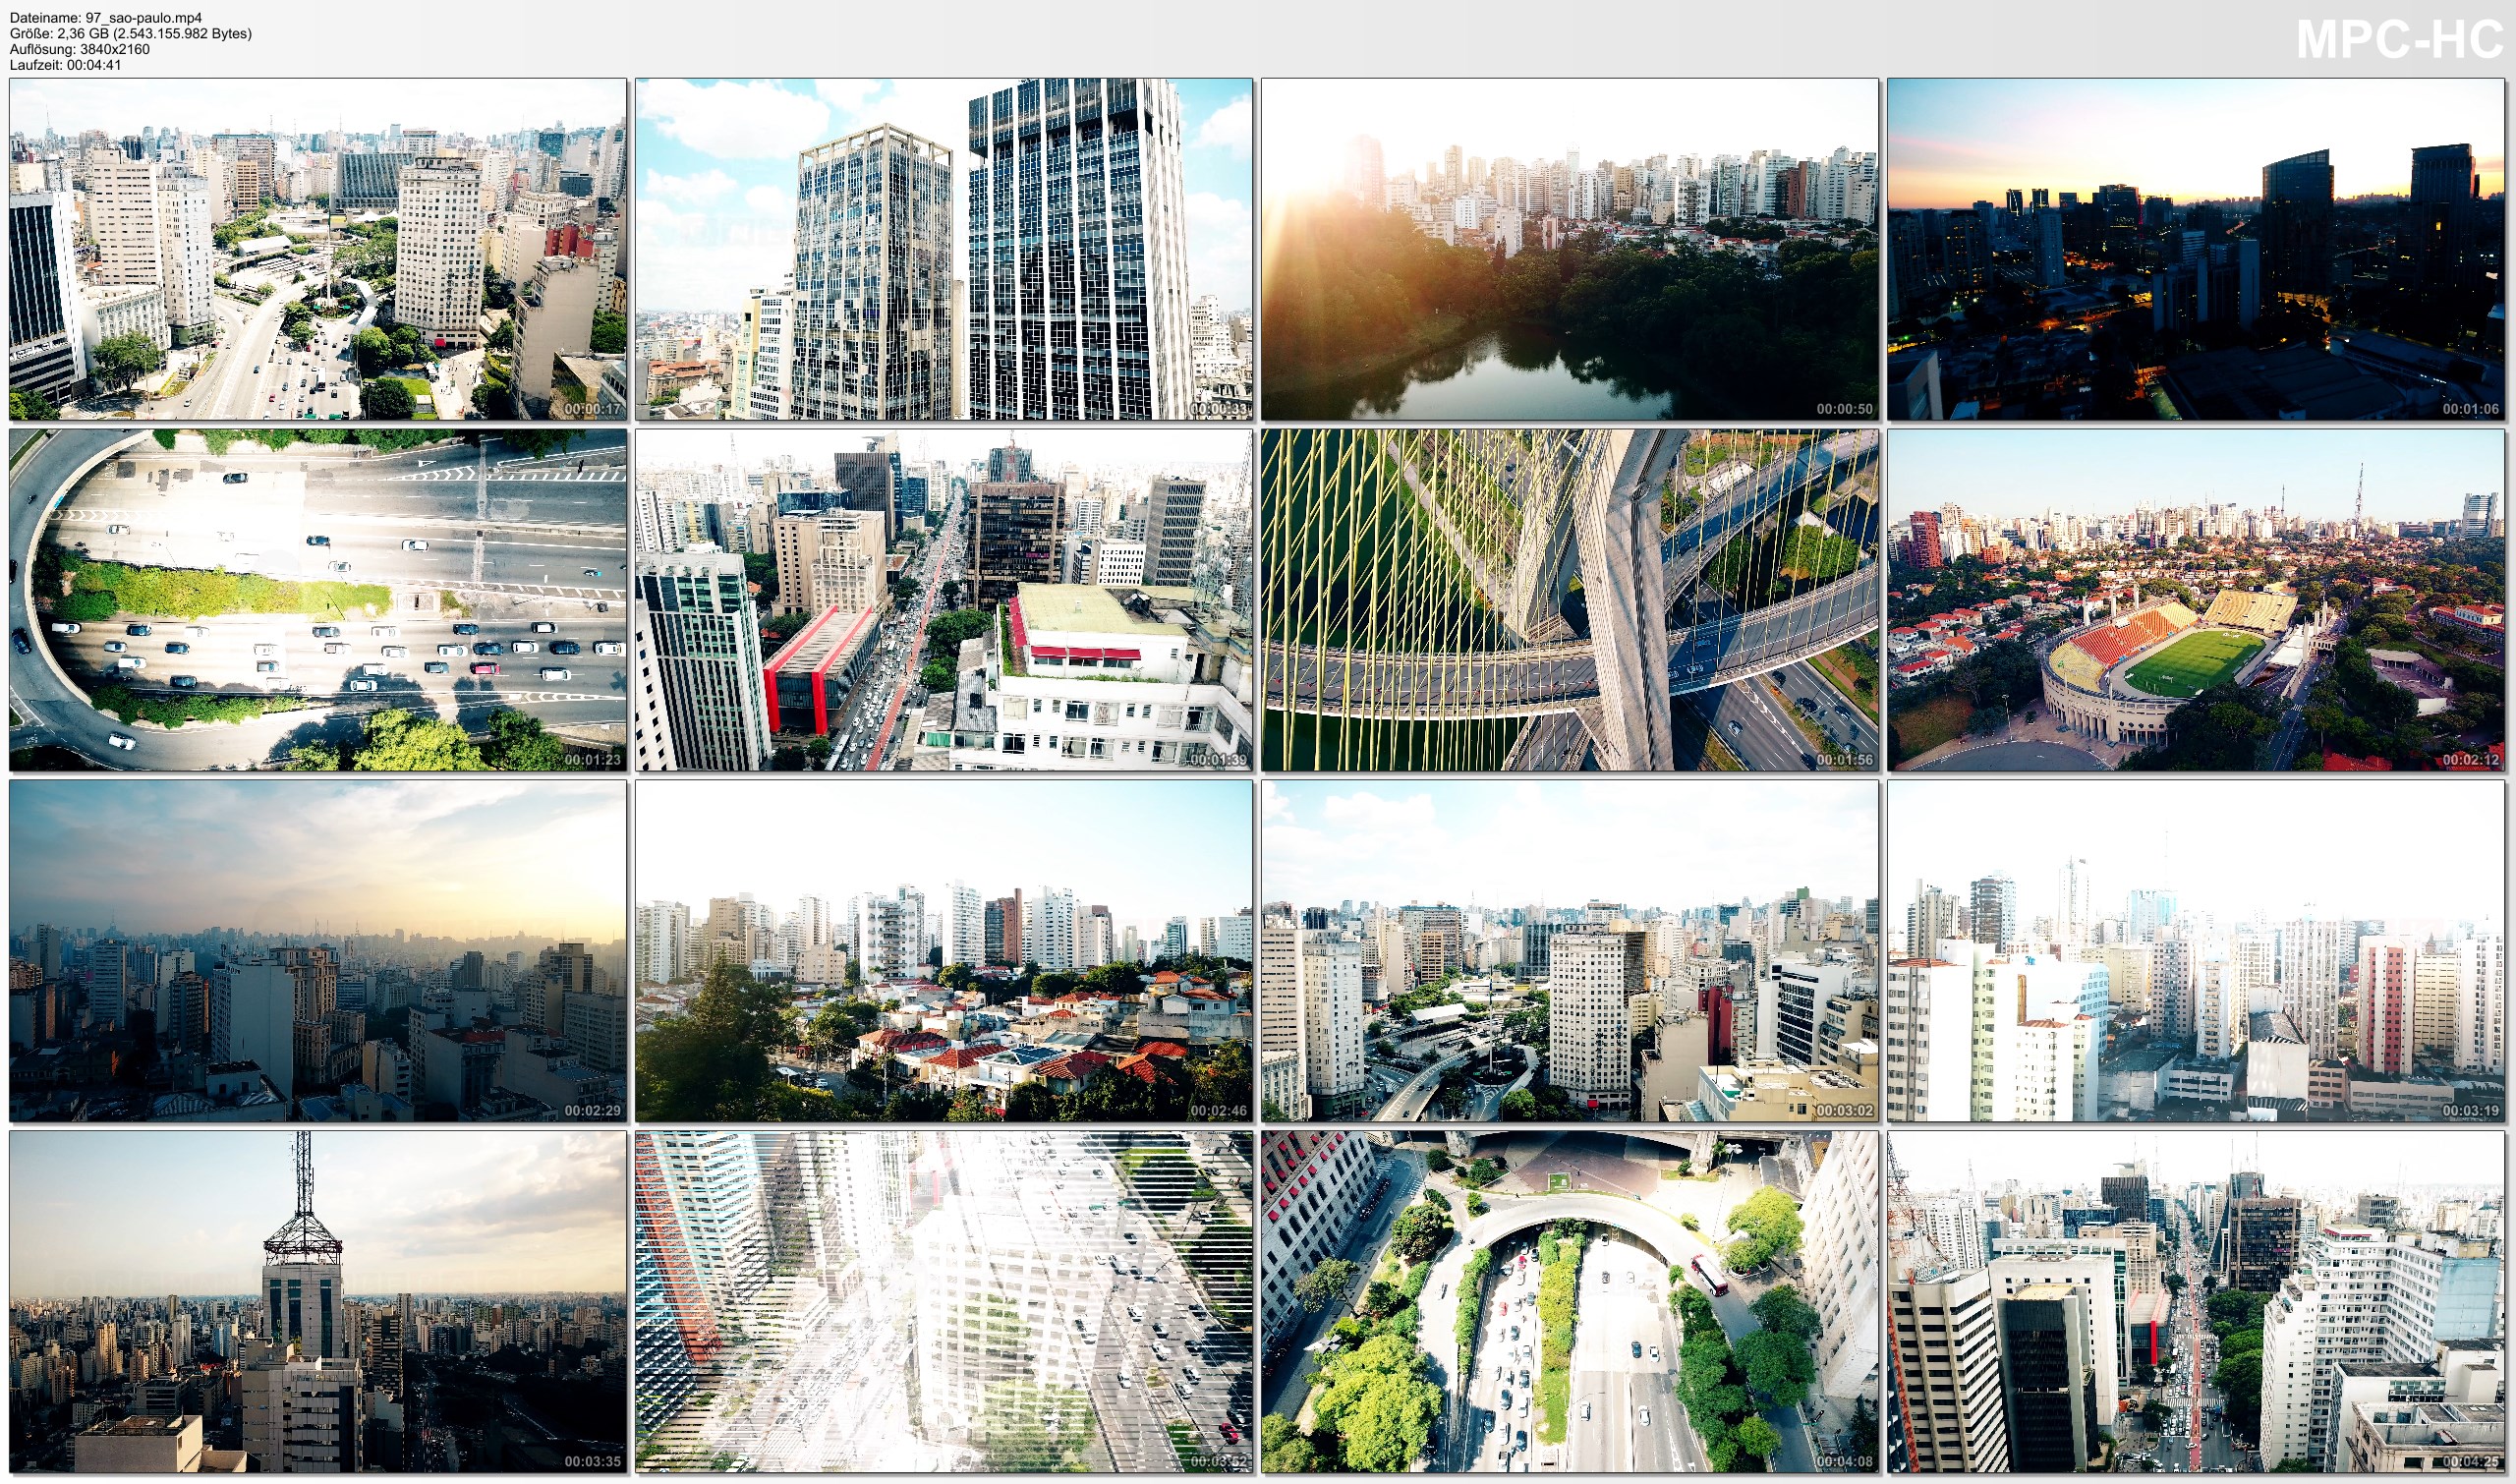 Drone Pictures from Video 【4K】Drone Footage | SAO PAULO 2019 ..:: Largest City of the Americas